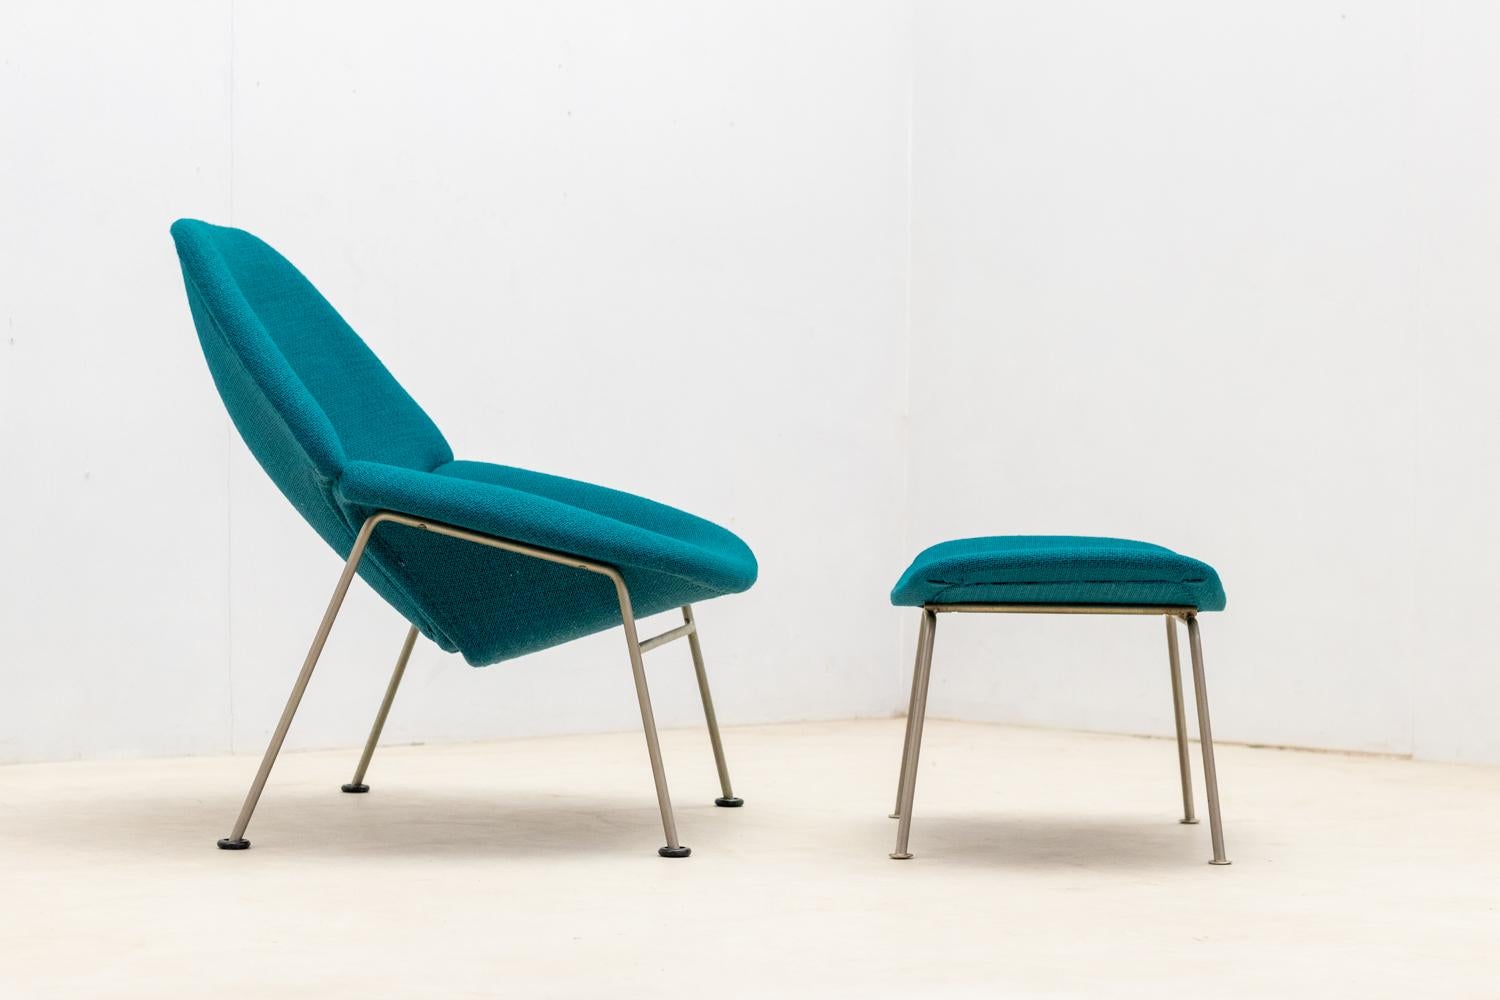 1st edition  Oyster lounge chair ( model F555 )  designed by the french Pierre Paulin and introduced in 1958 by Artifort. 

The armchair has been newly upholstered.
Nice vintage condition.

Price for one set : armchair and his ottoman.

2 sets